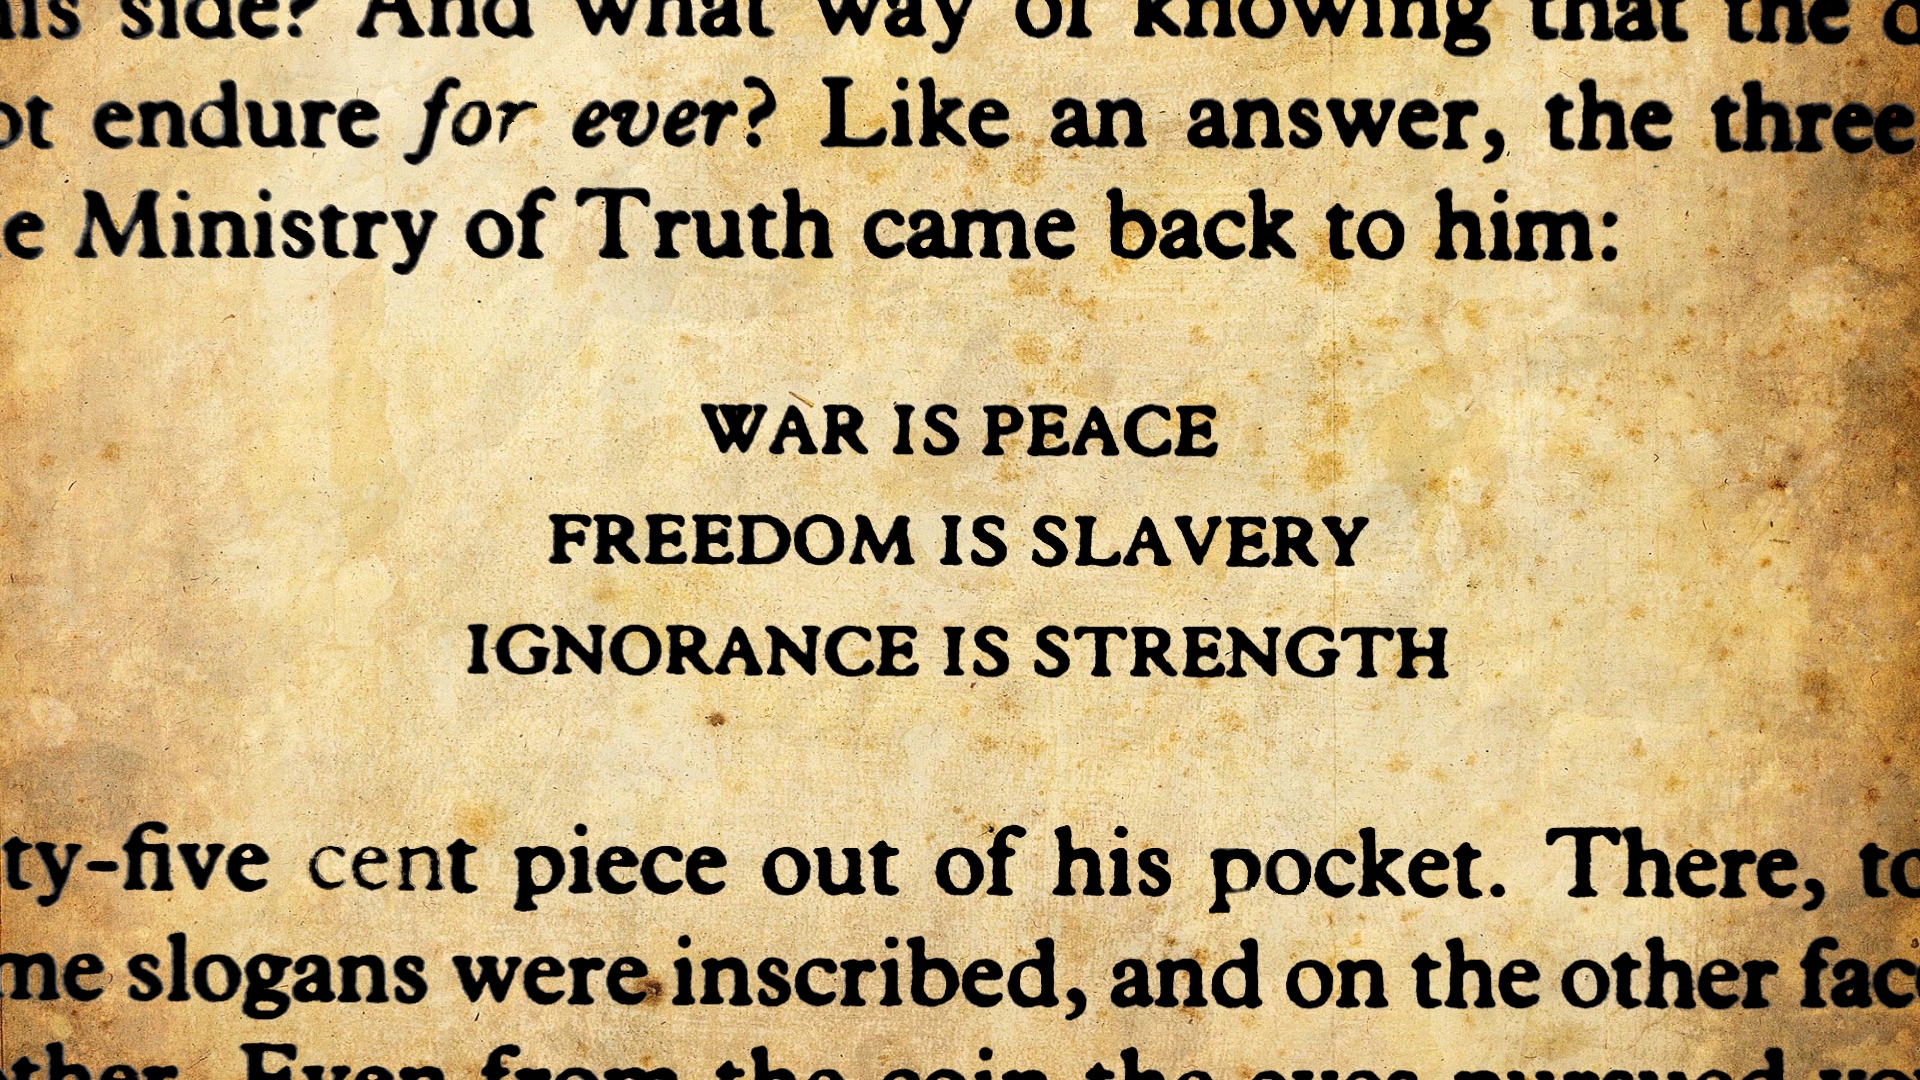 1984 George Orwell Books Quote 1984 1920x1080